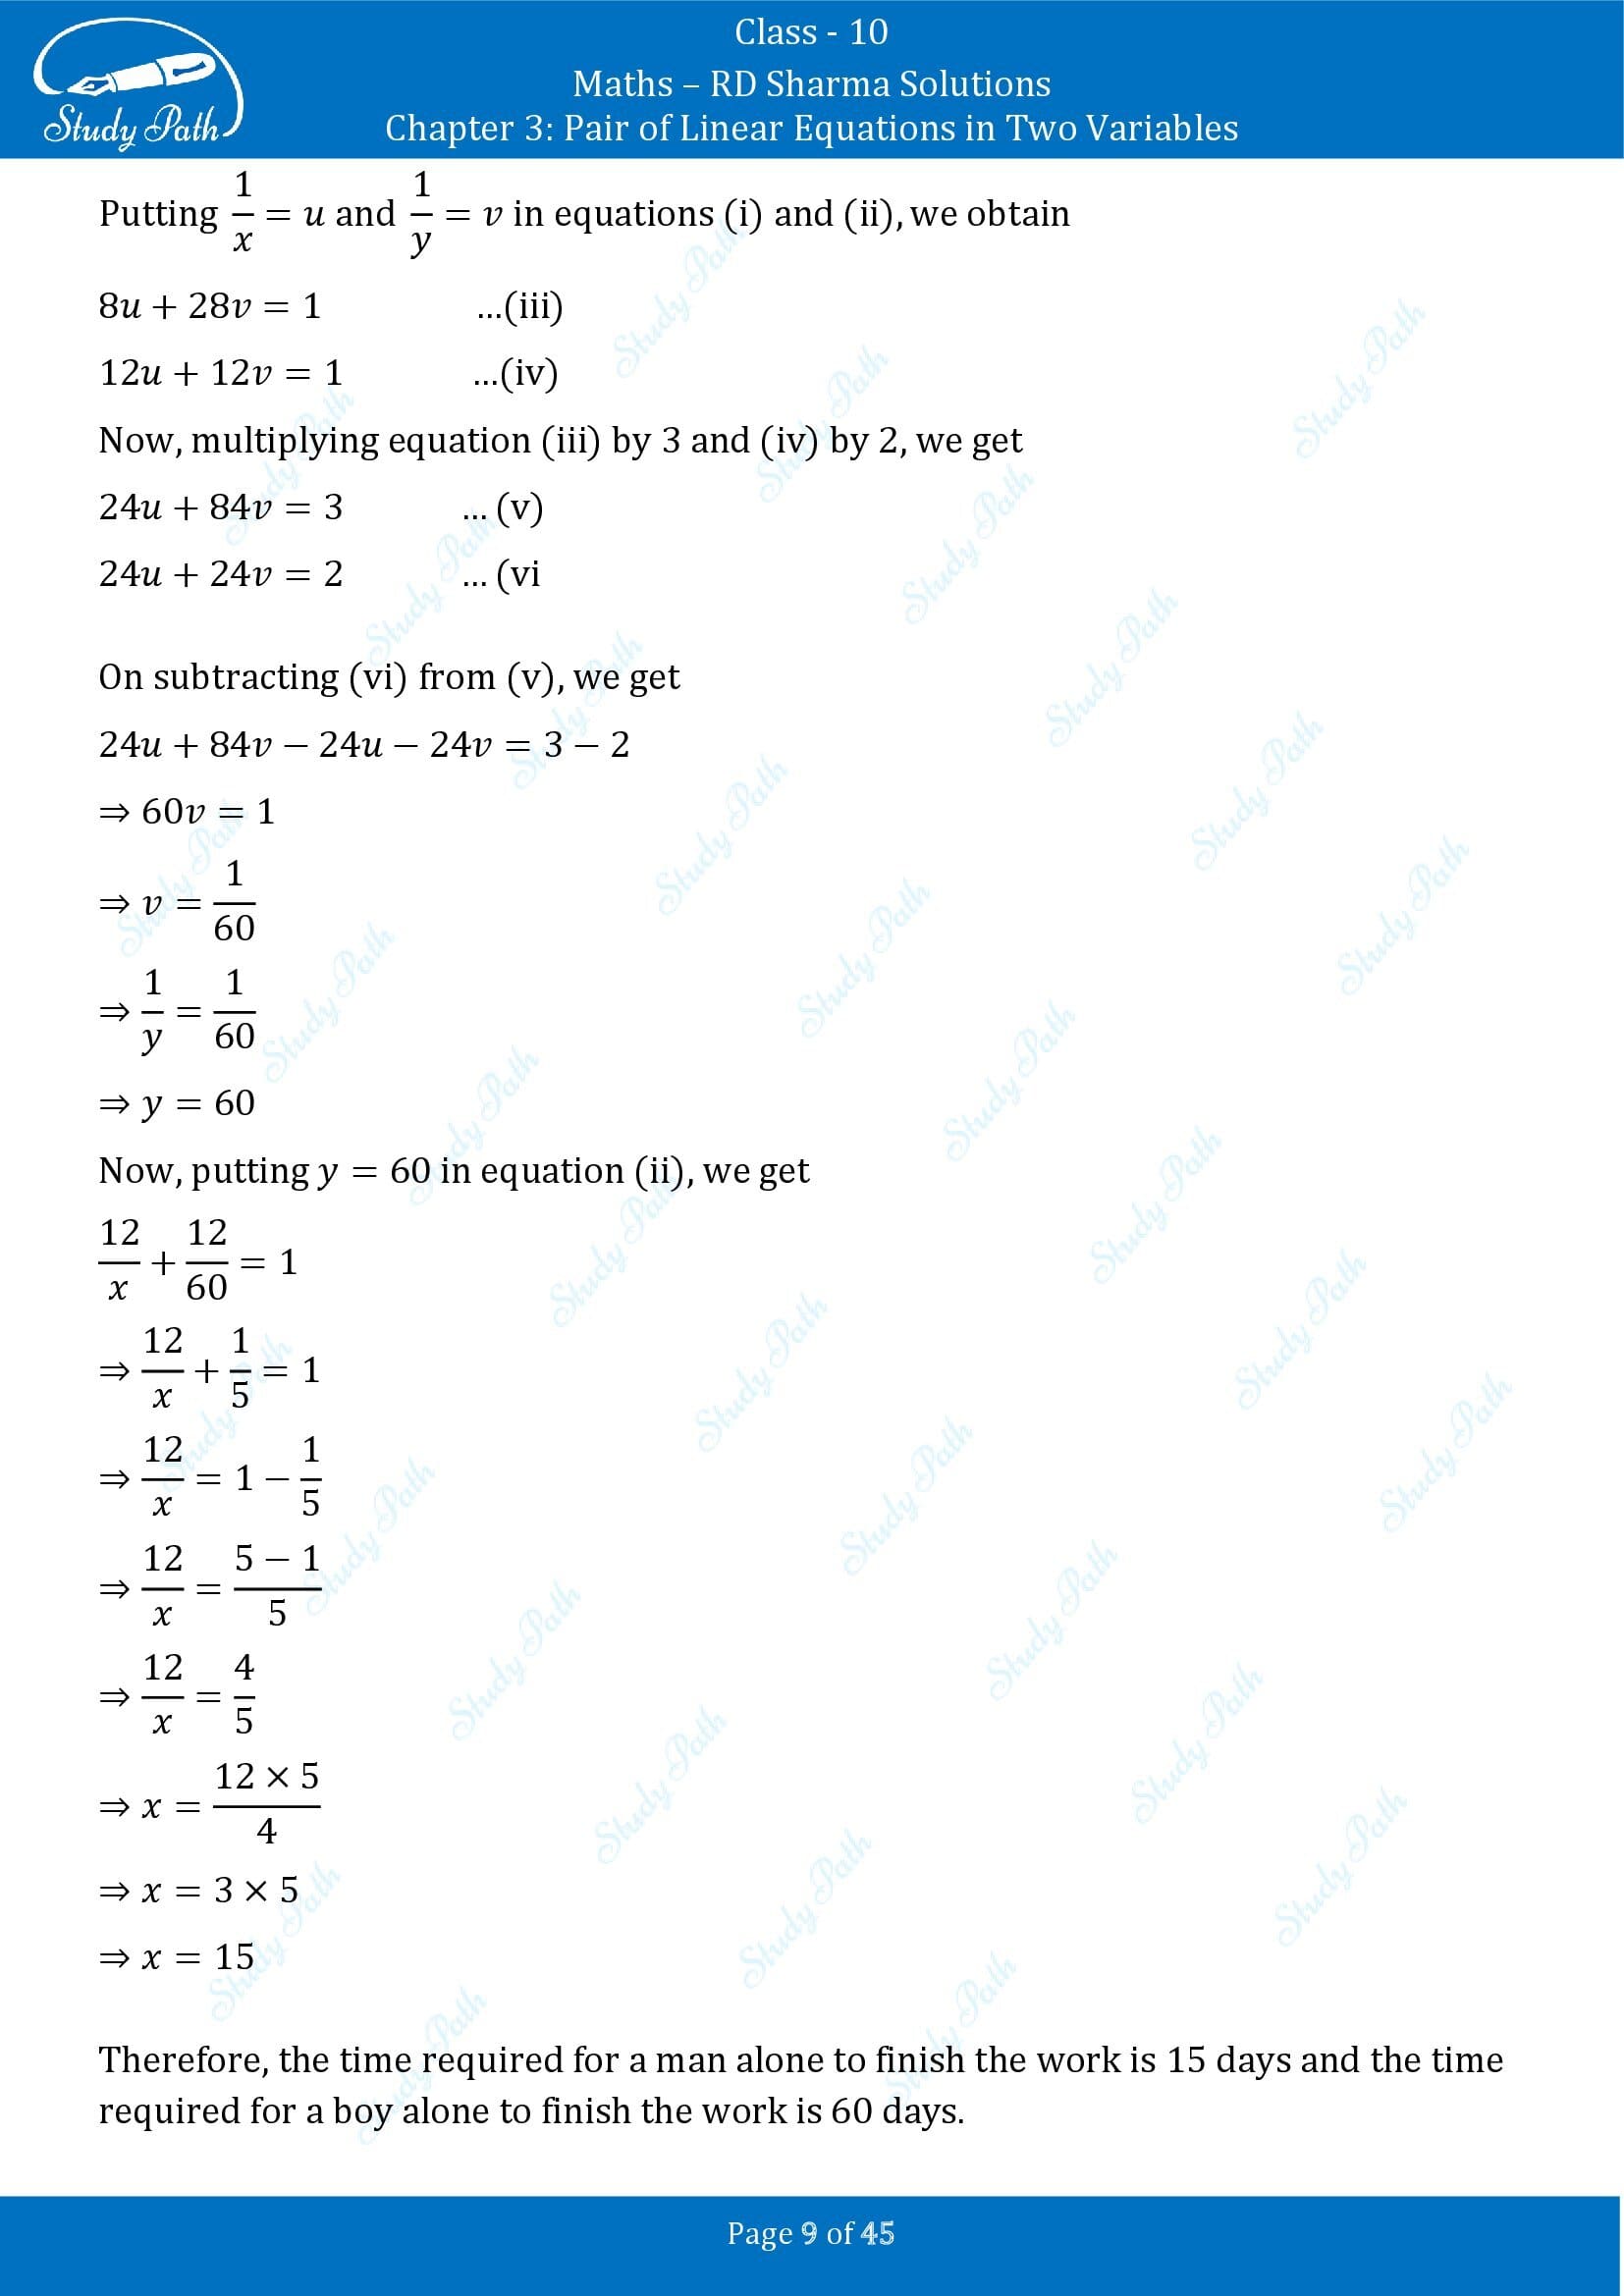 RD Sharma Solutions Class 10 Chapter 3 Pair of Linear Equations in Two Variables Exercise 3.11 00009